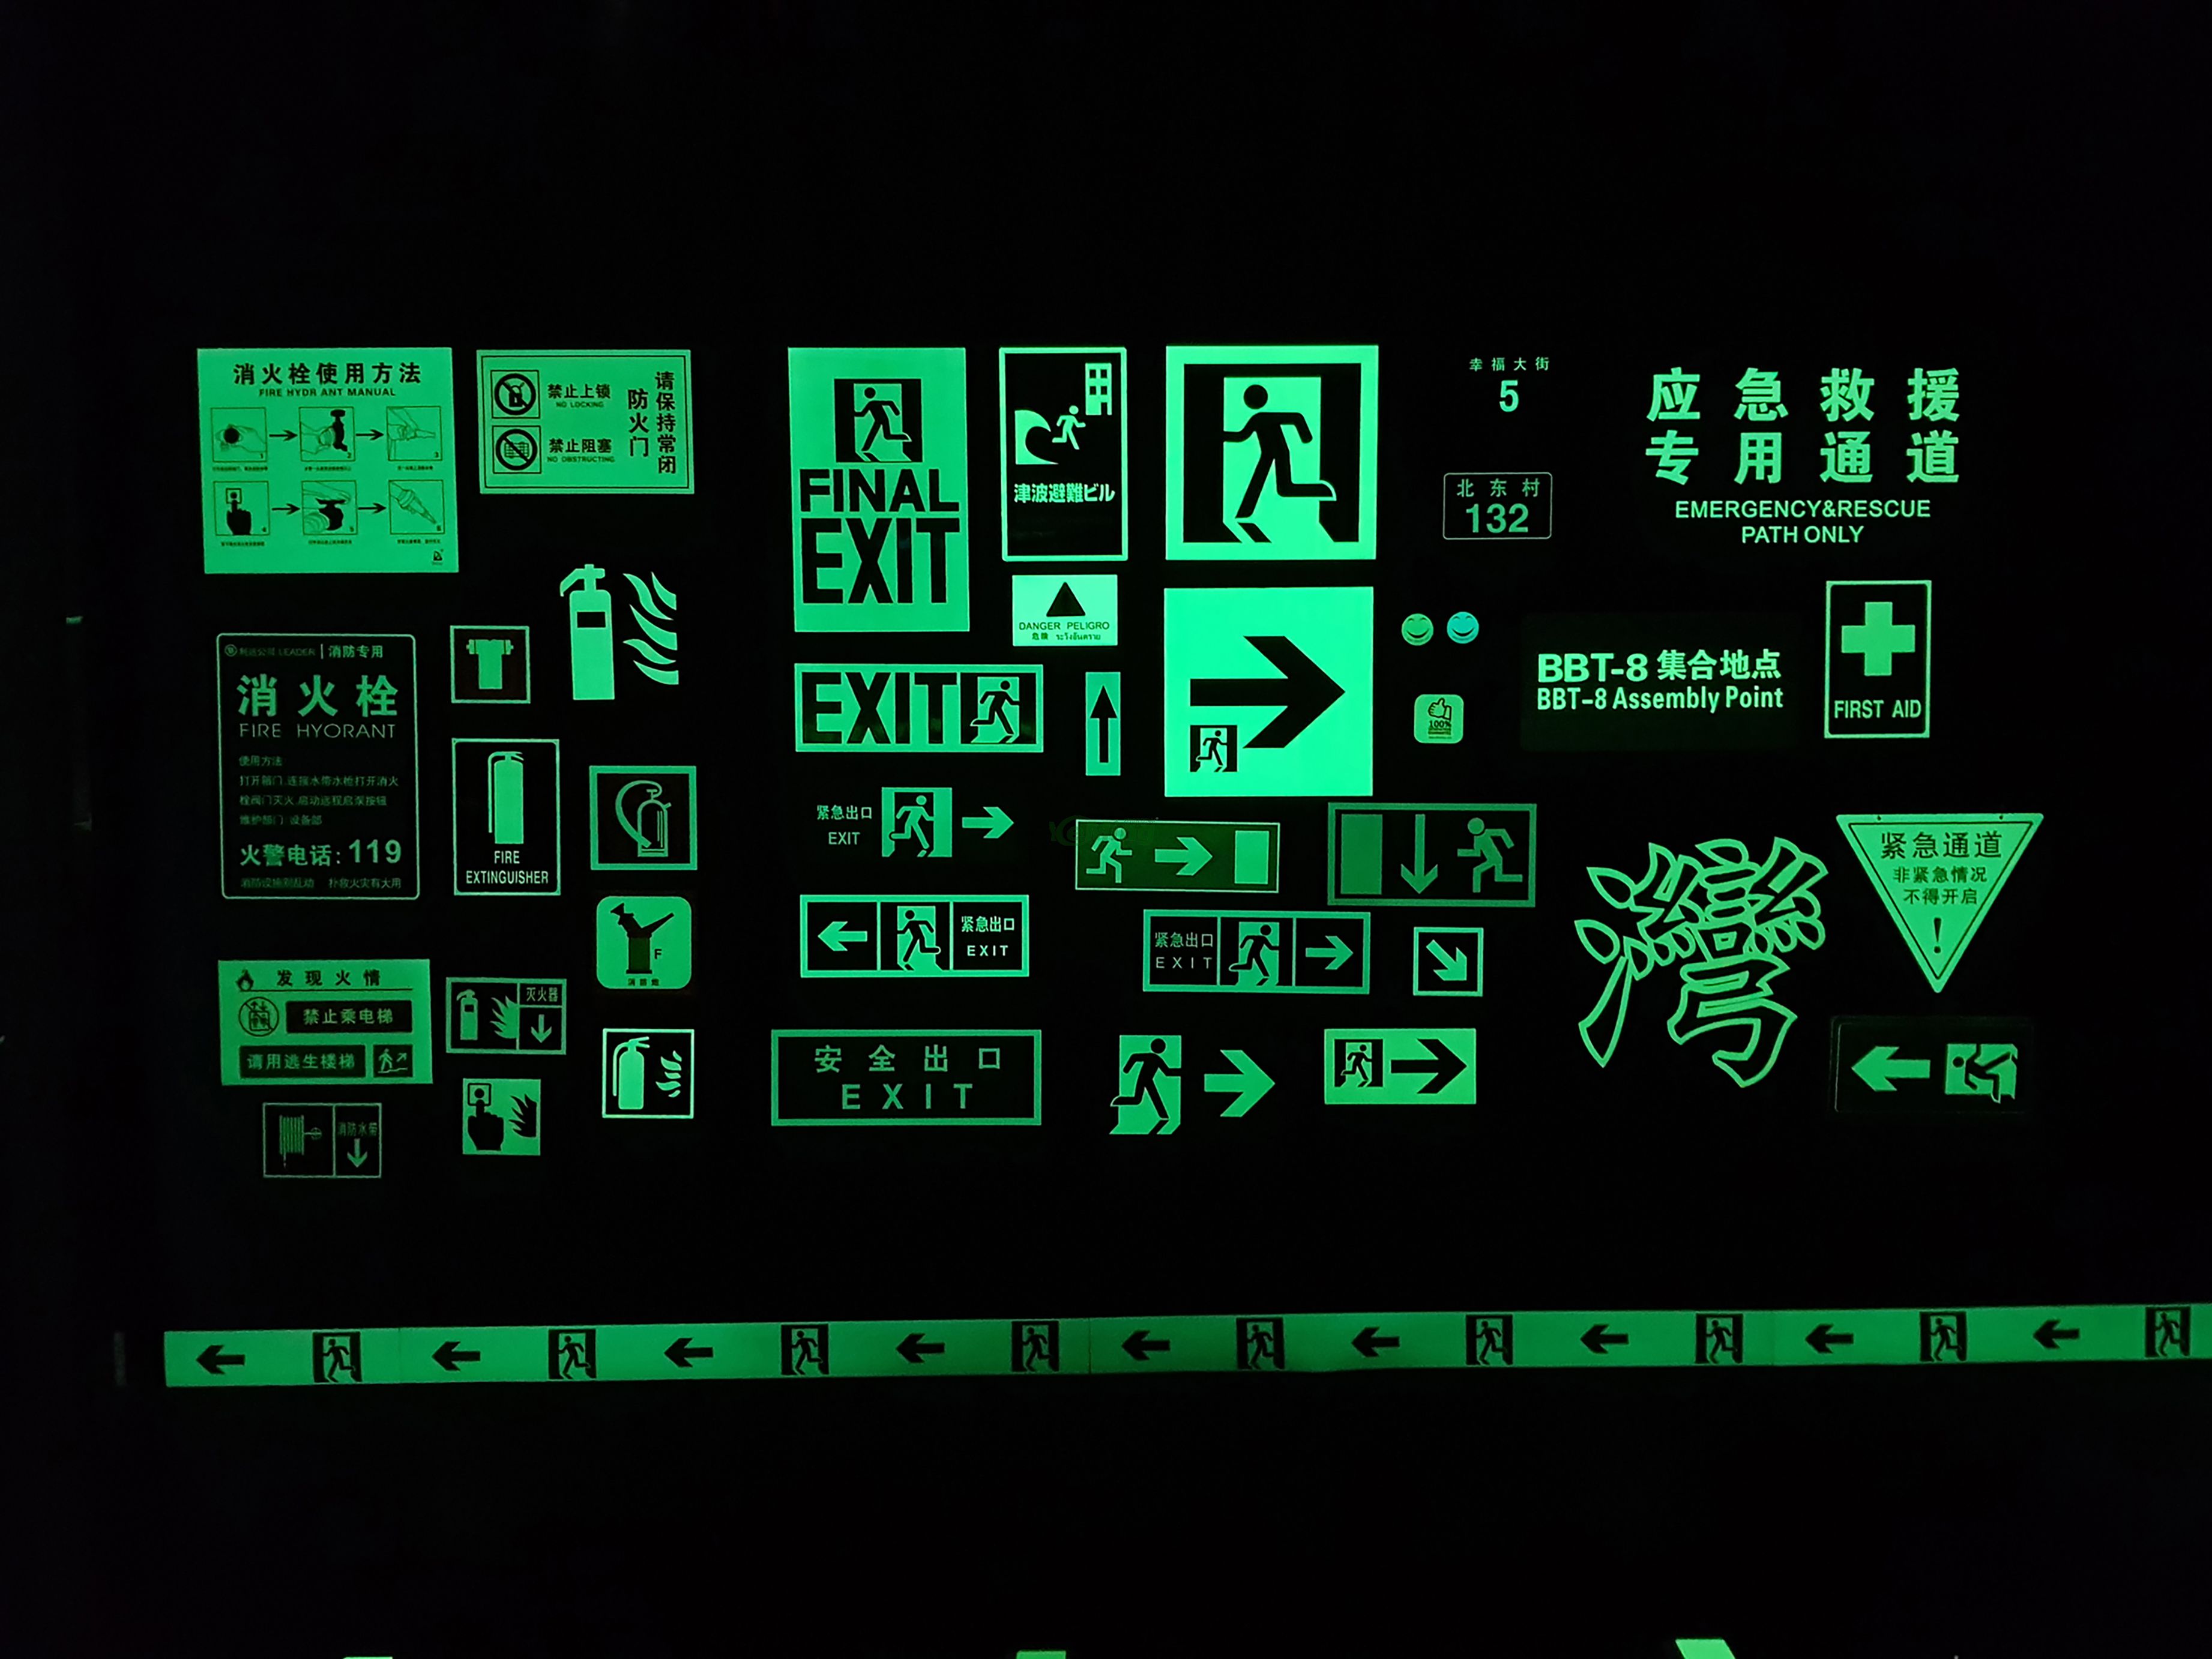 Suppliers Wholesale Signage Glow in The Dark Emergency Exit Signs